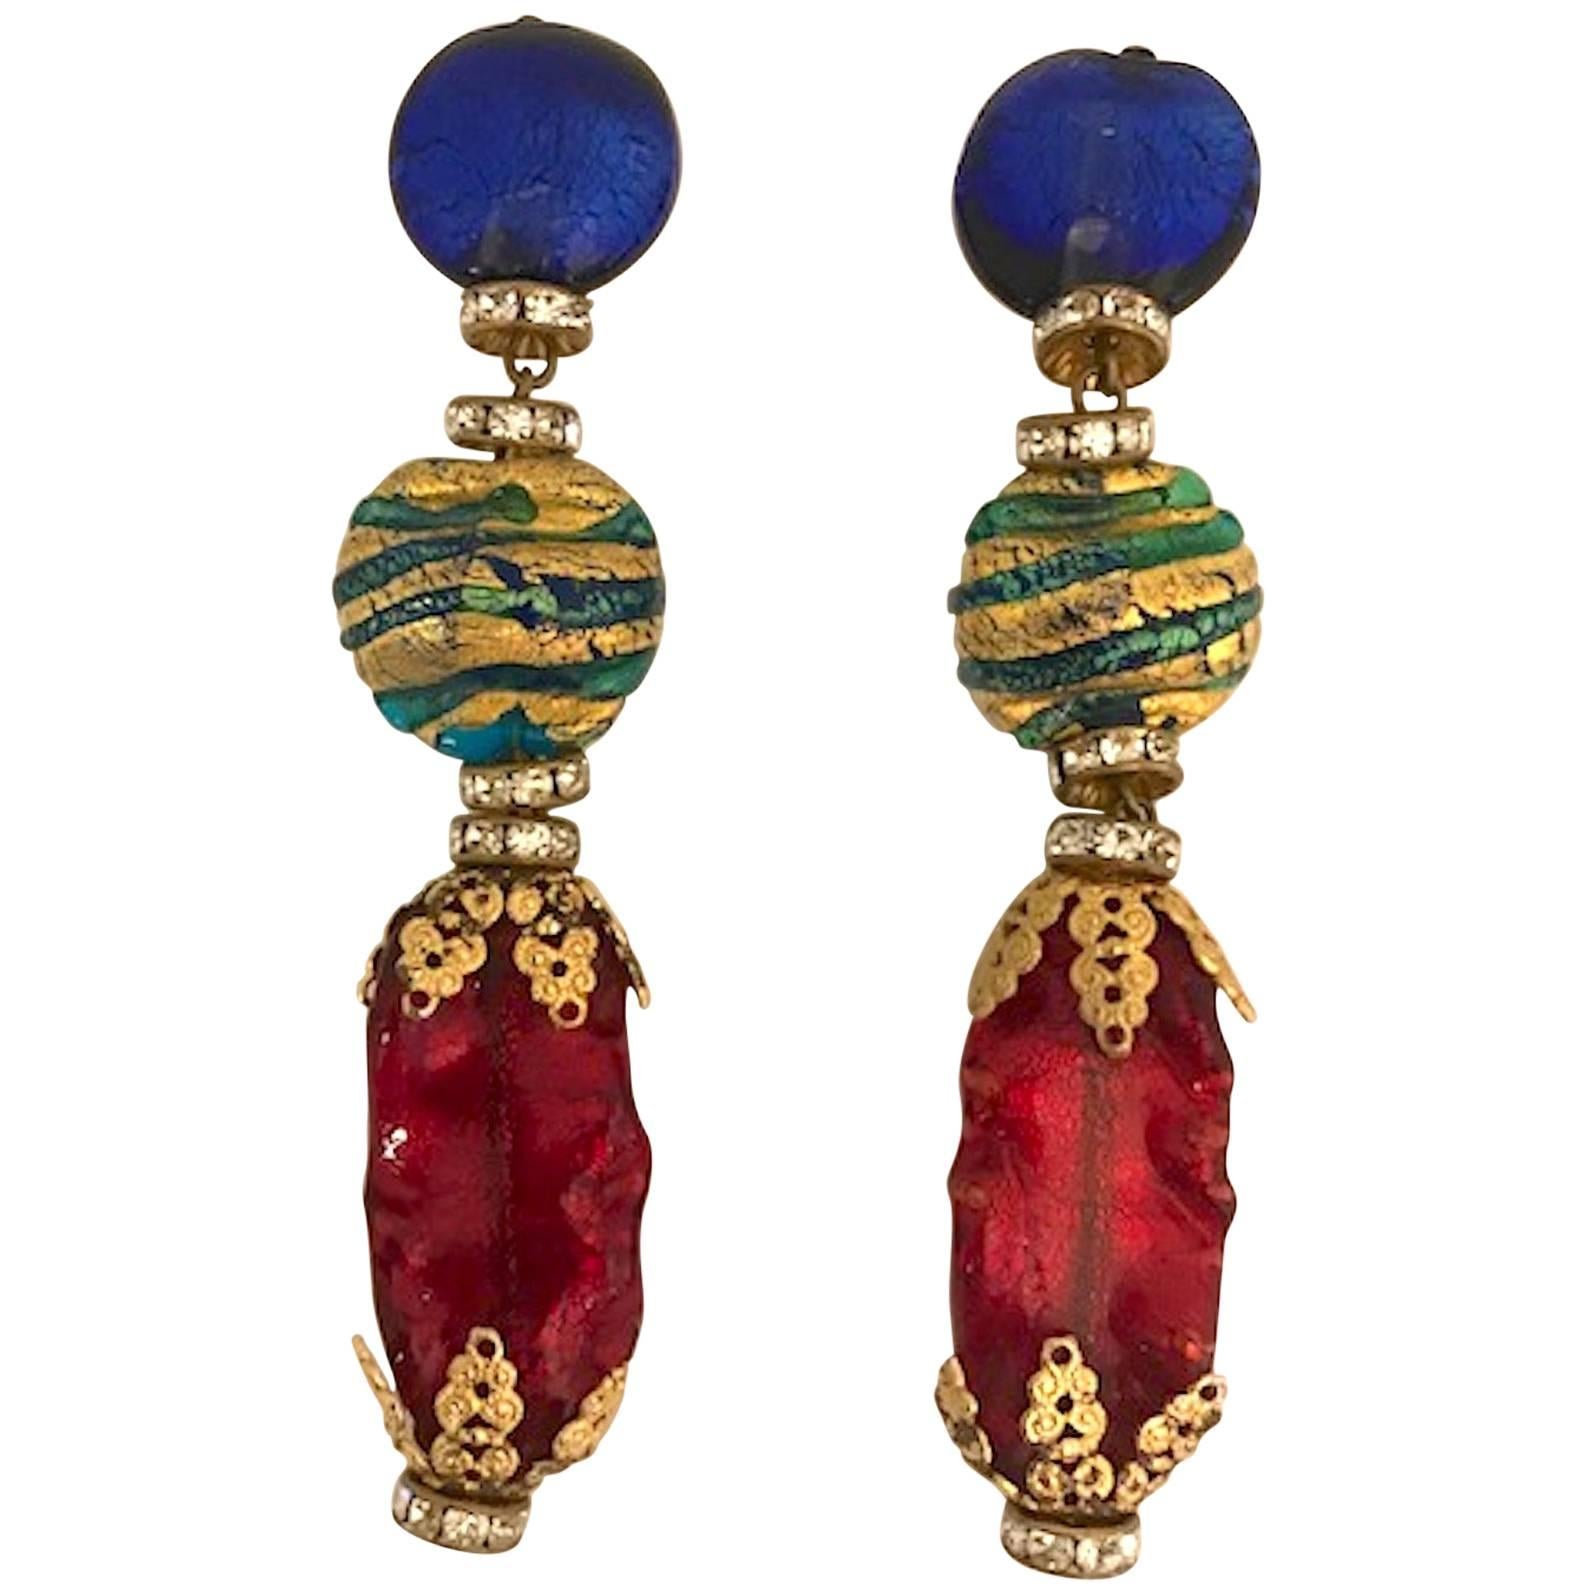 Venetian glass bead earrings from actress Elsa Martinelli's personal collection